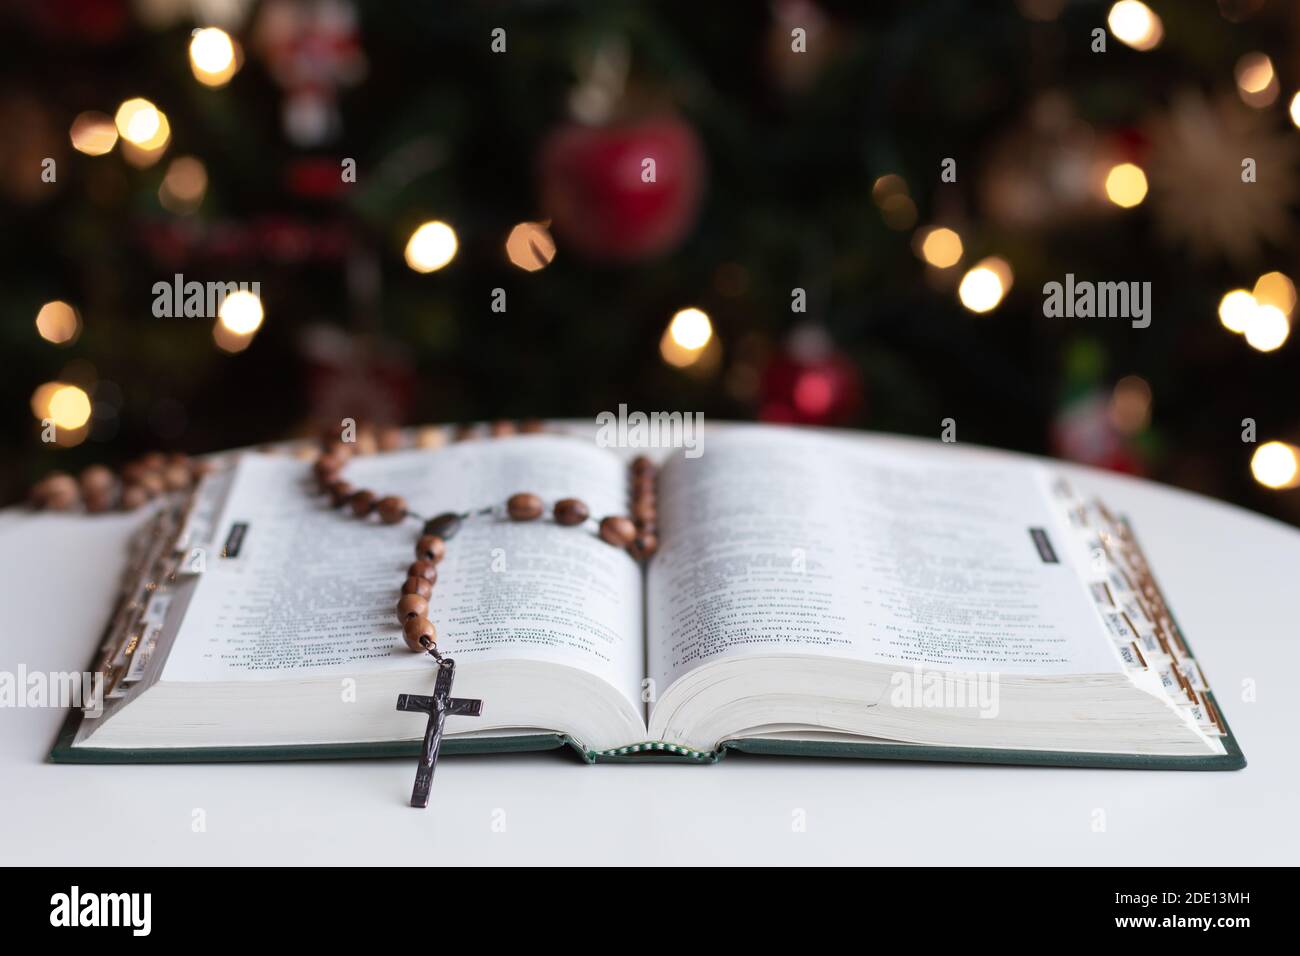 Open bible with wood rosary prayer beads laying on page with Christmas tree in background Stock Photo